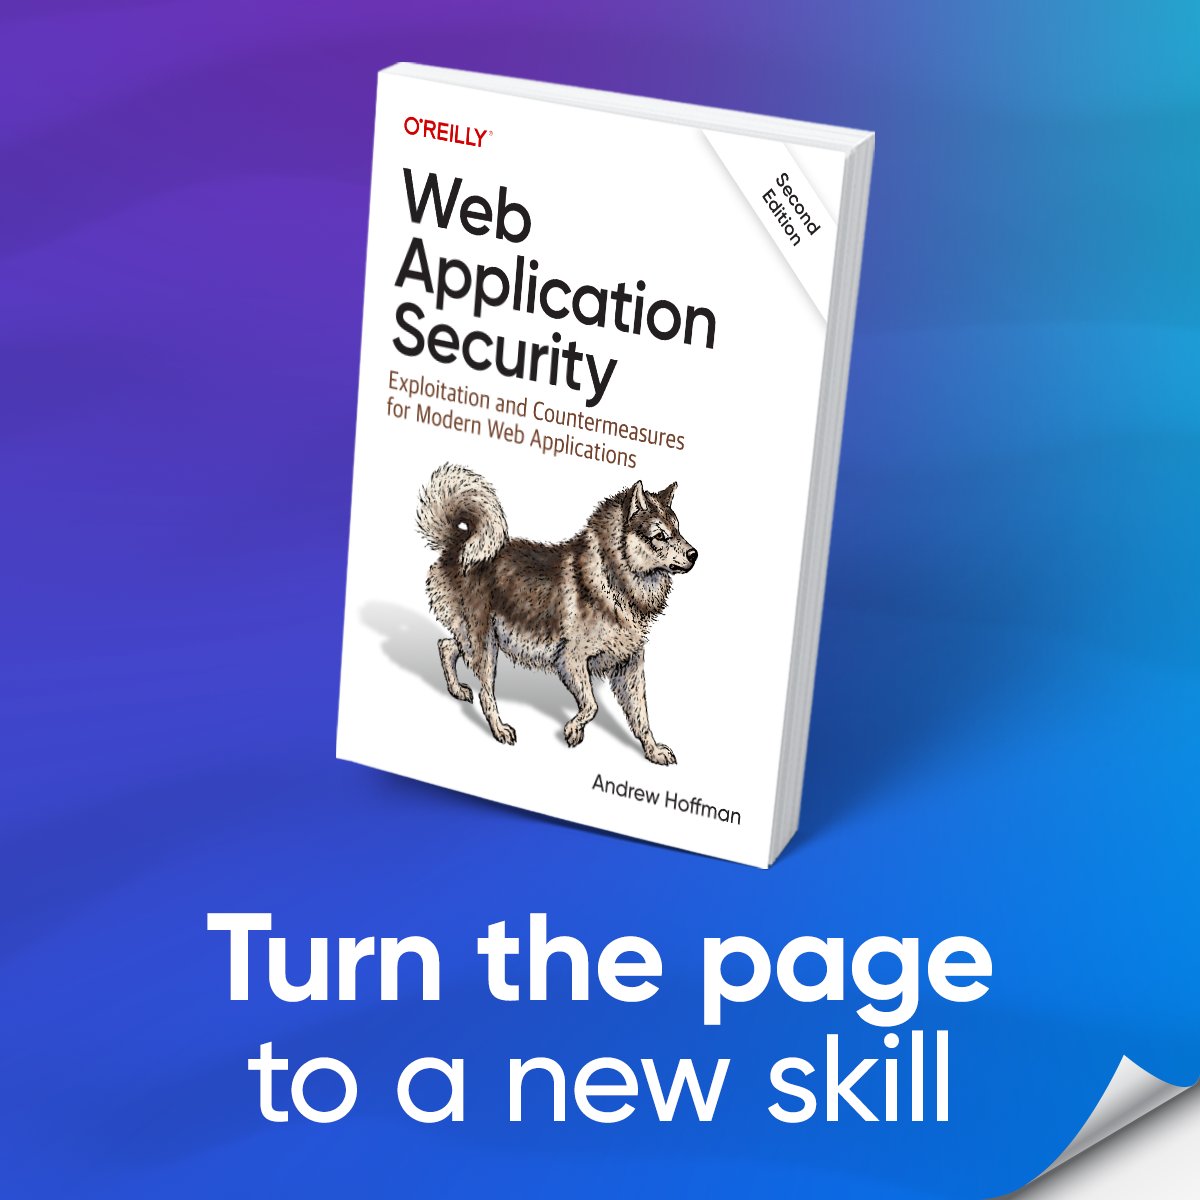 In this revised and updated second edition, @and1hof examines dozens of related topics, from the latest types of attacks and mitigations to threat modeling, the secure software development lifecycle (SSDL/SDLC), and more. oreil.ly/GzQnm